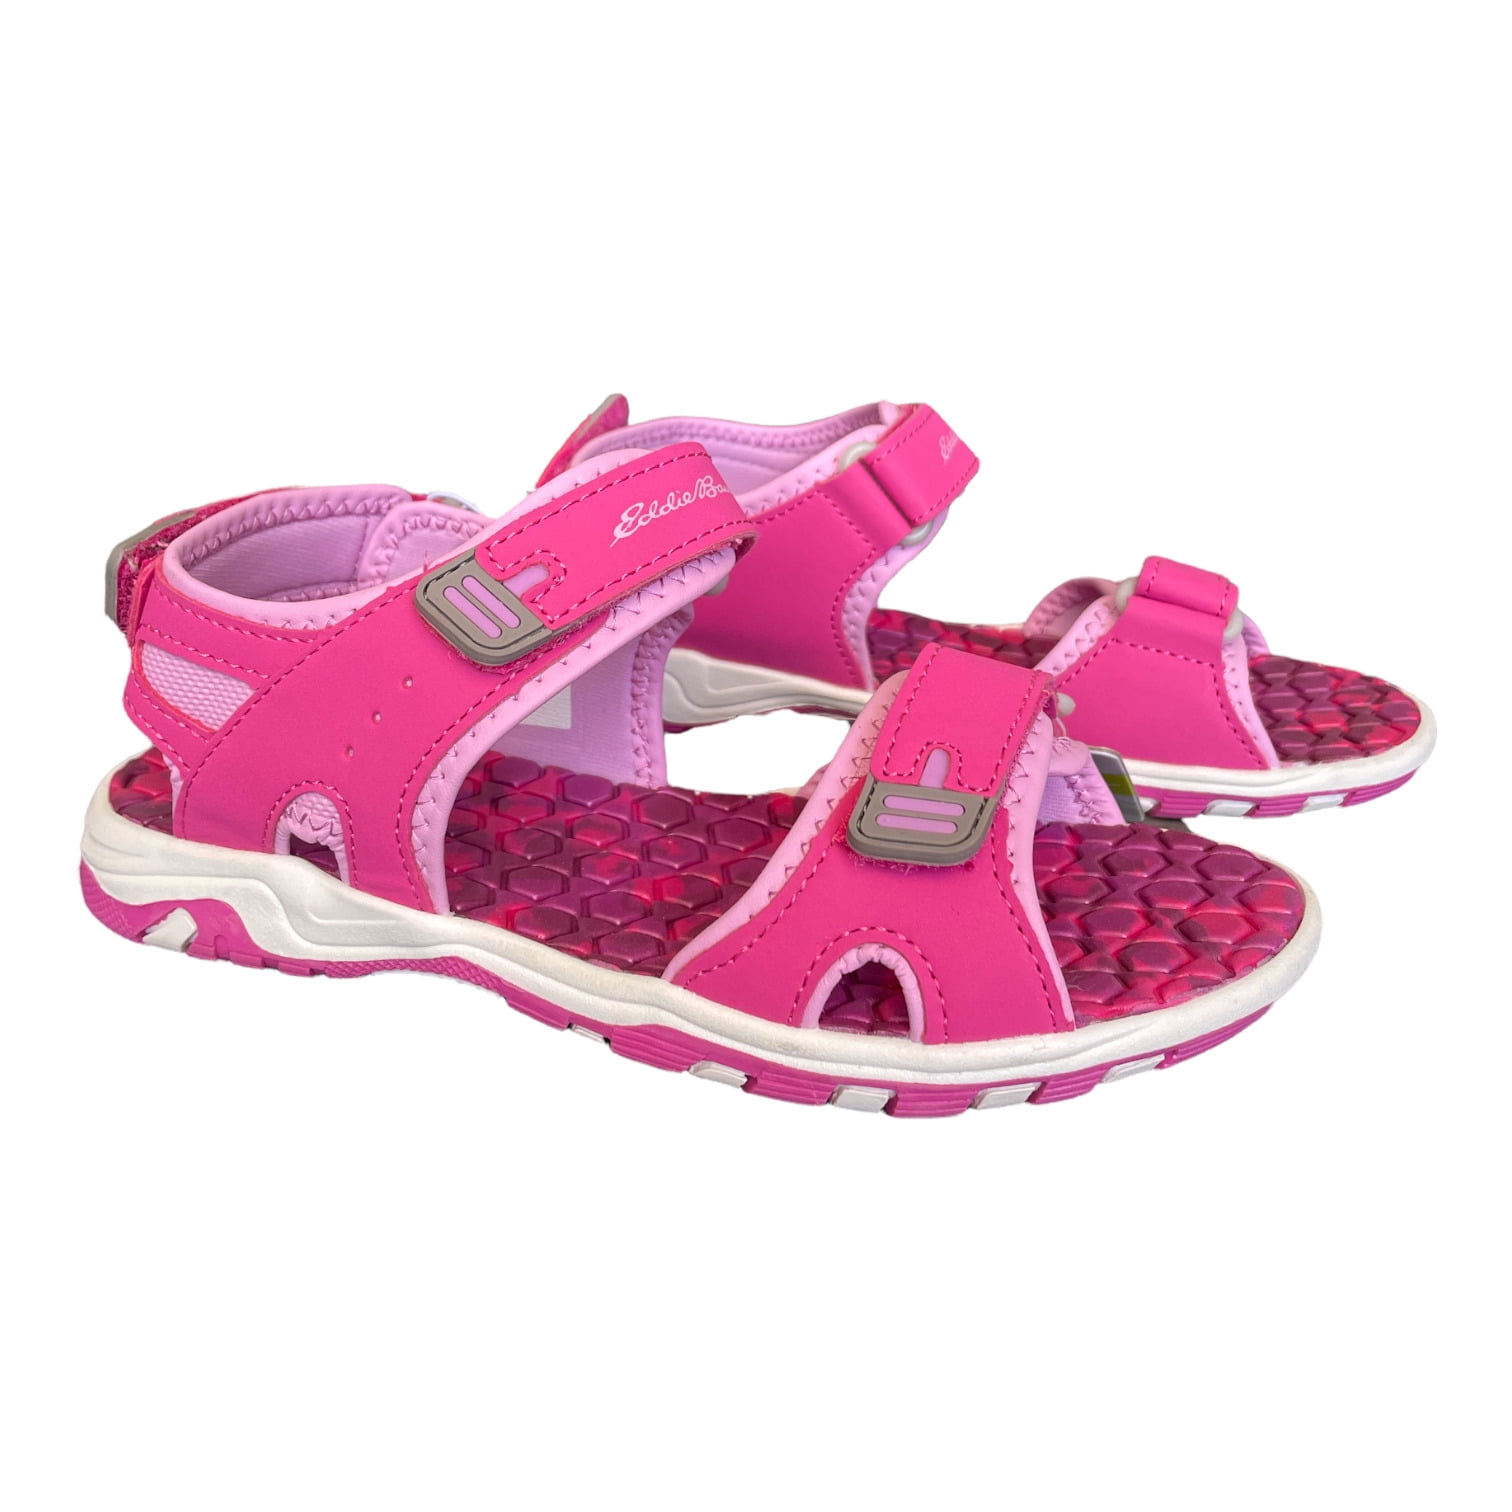 Womens Sandals at Eddie Bauer  Shoes  Stylicy India